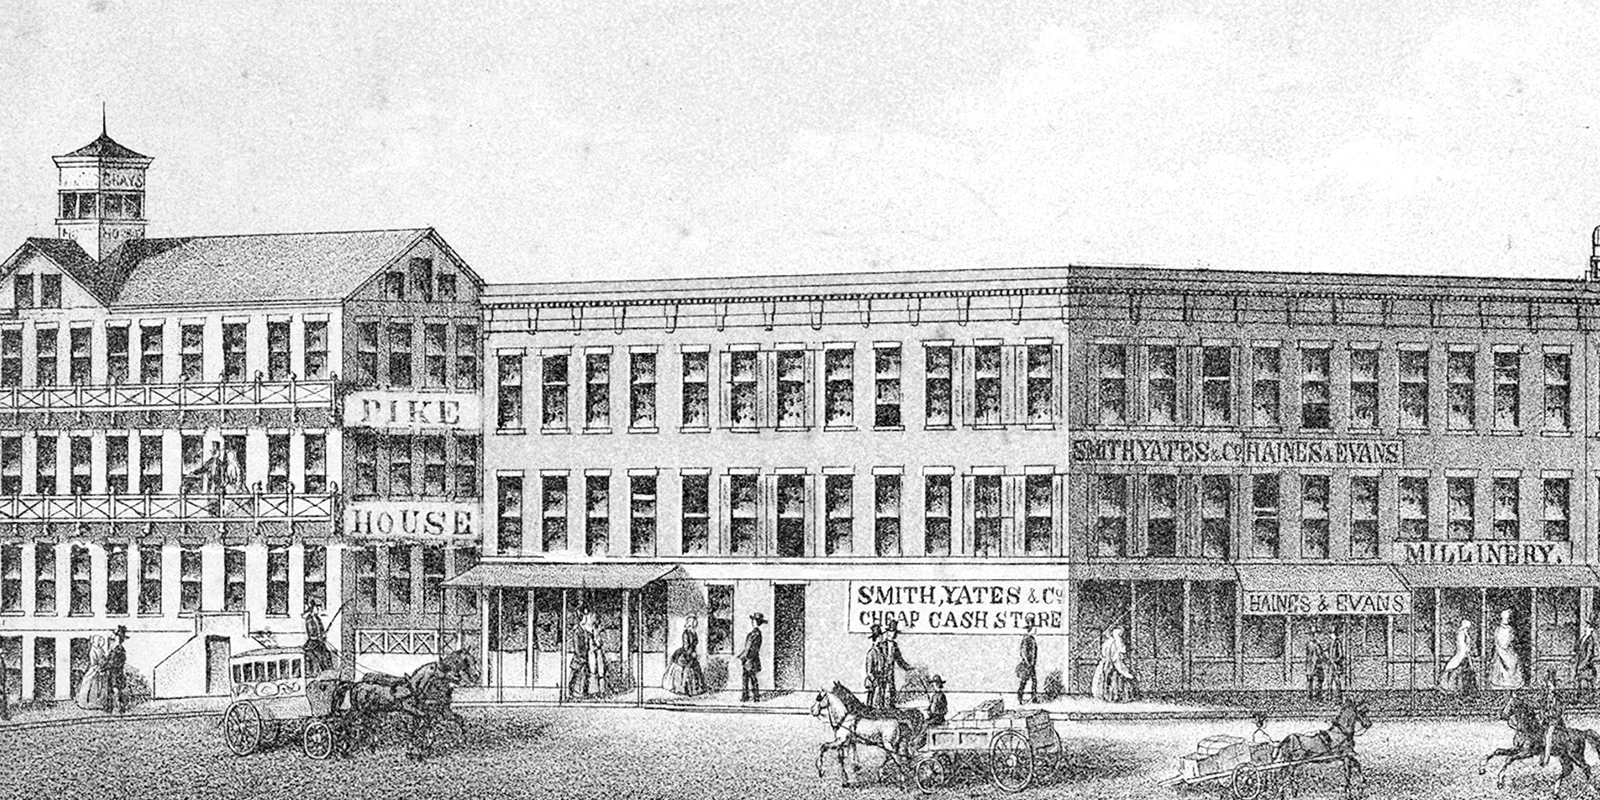 Black and white drawing of a large building with multiple businesses and people walking by.